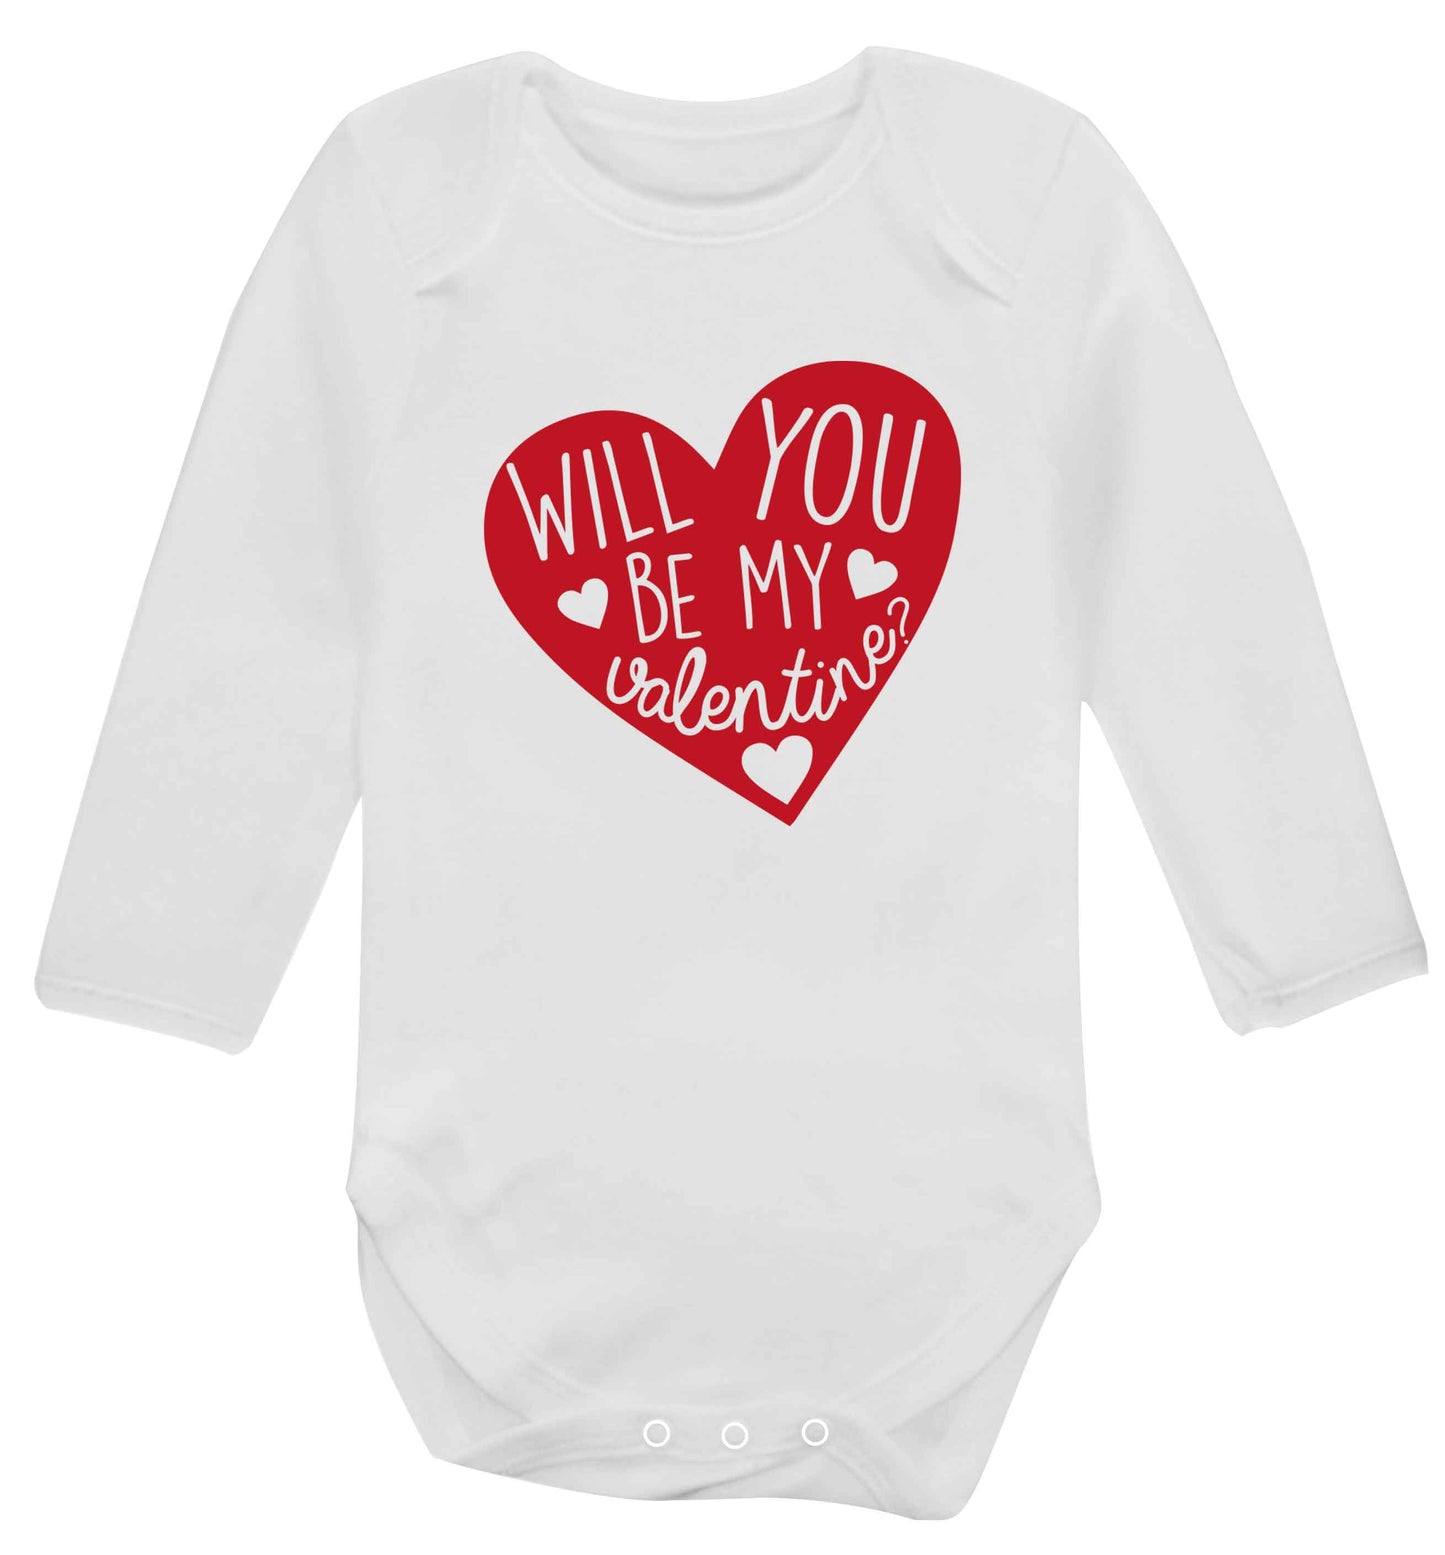 Will you be my valentine? baby vest long sleeved white 6-12 months